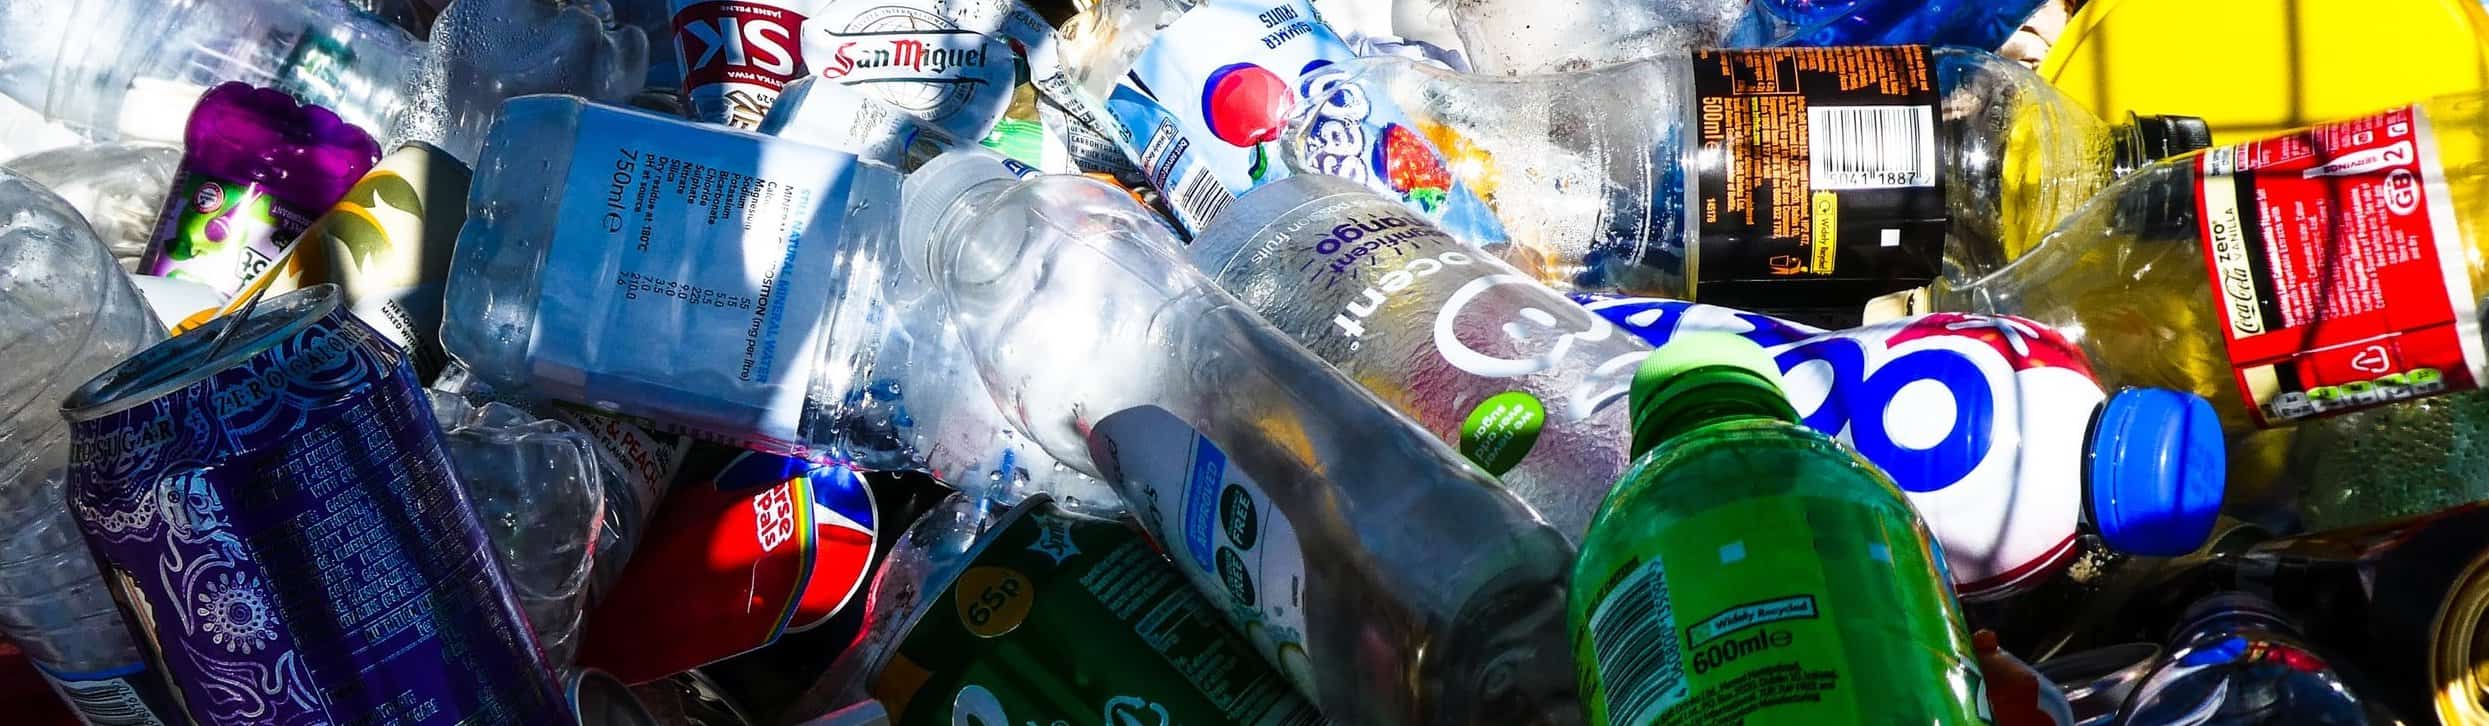 Waste with different plastic bottles